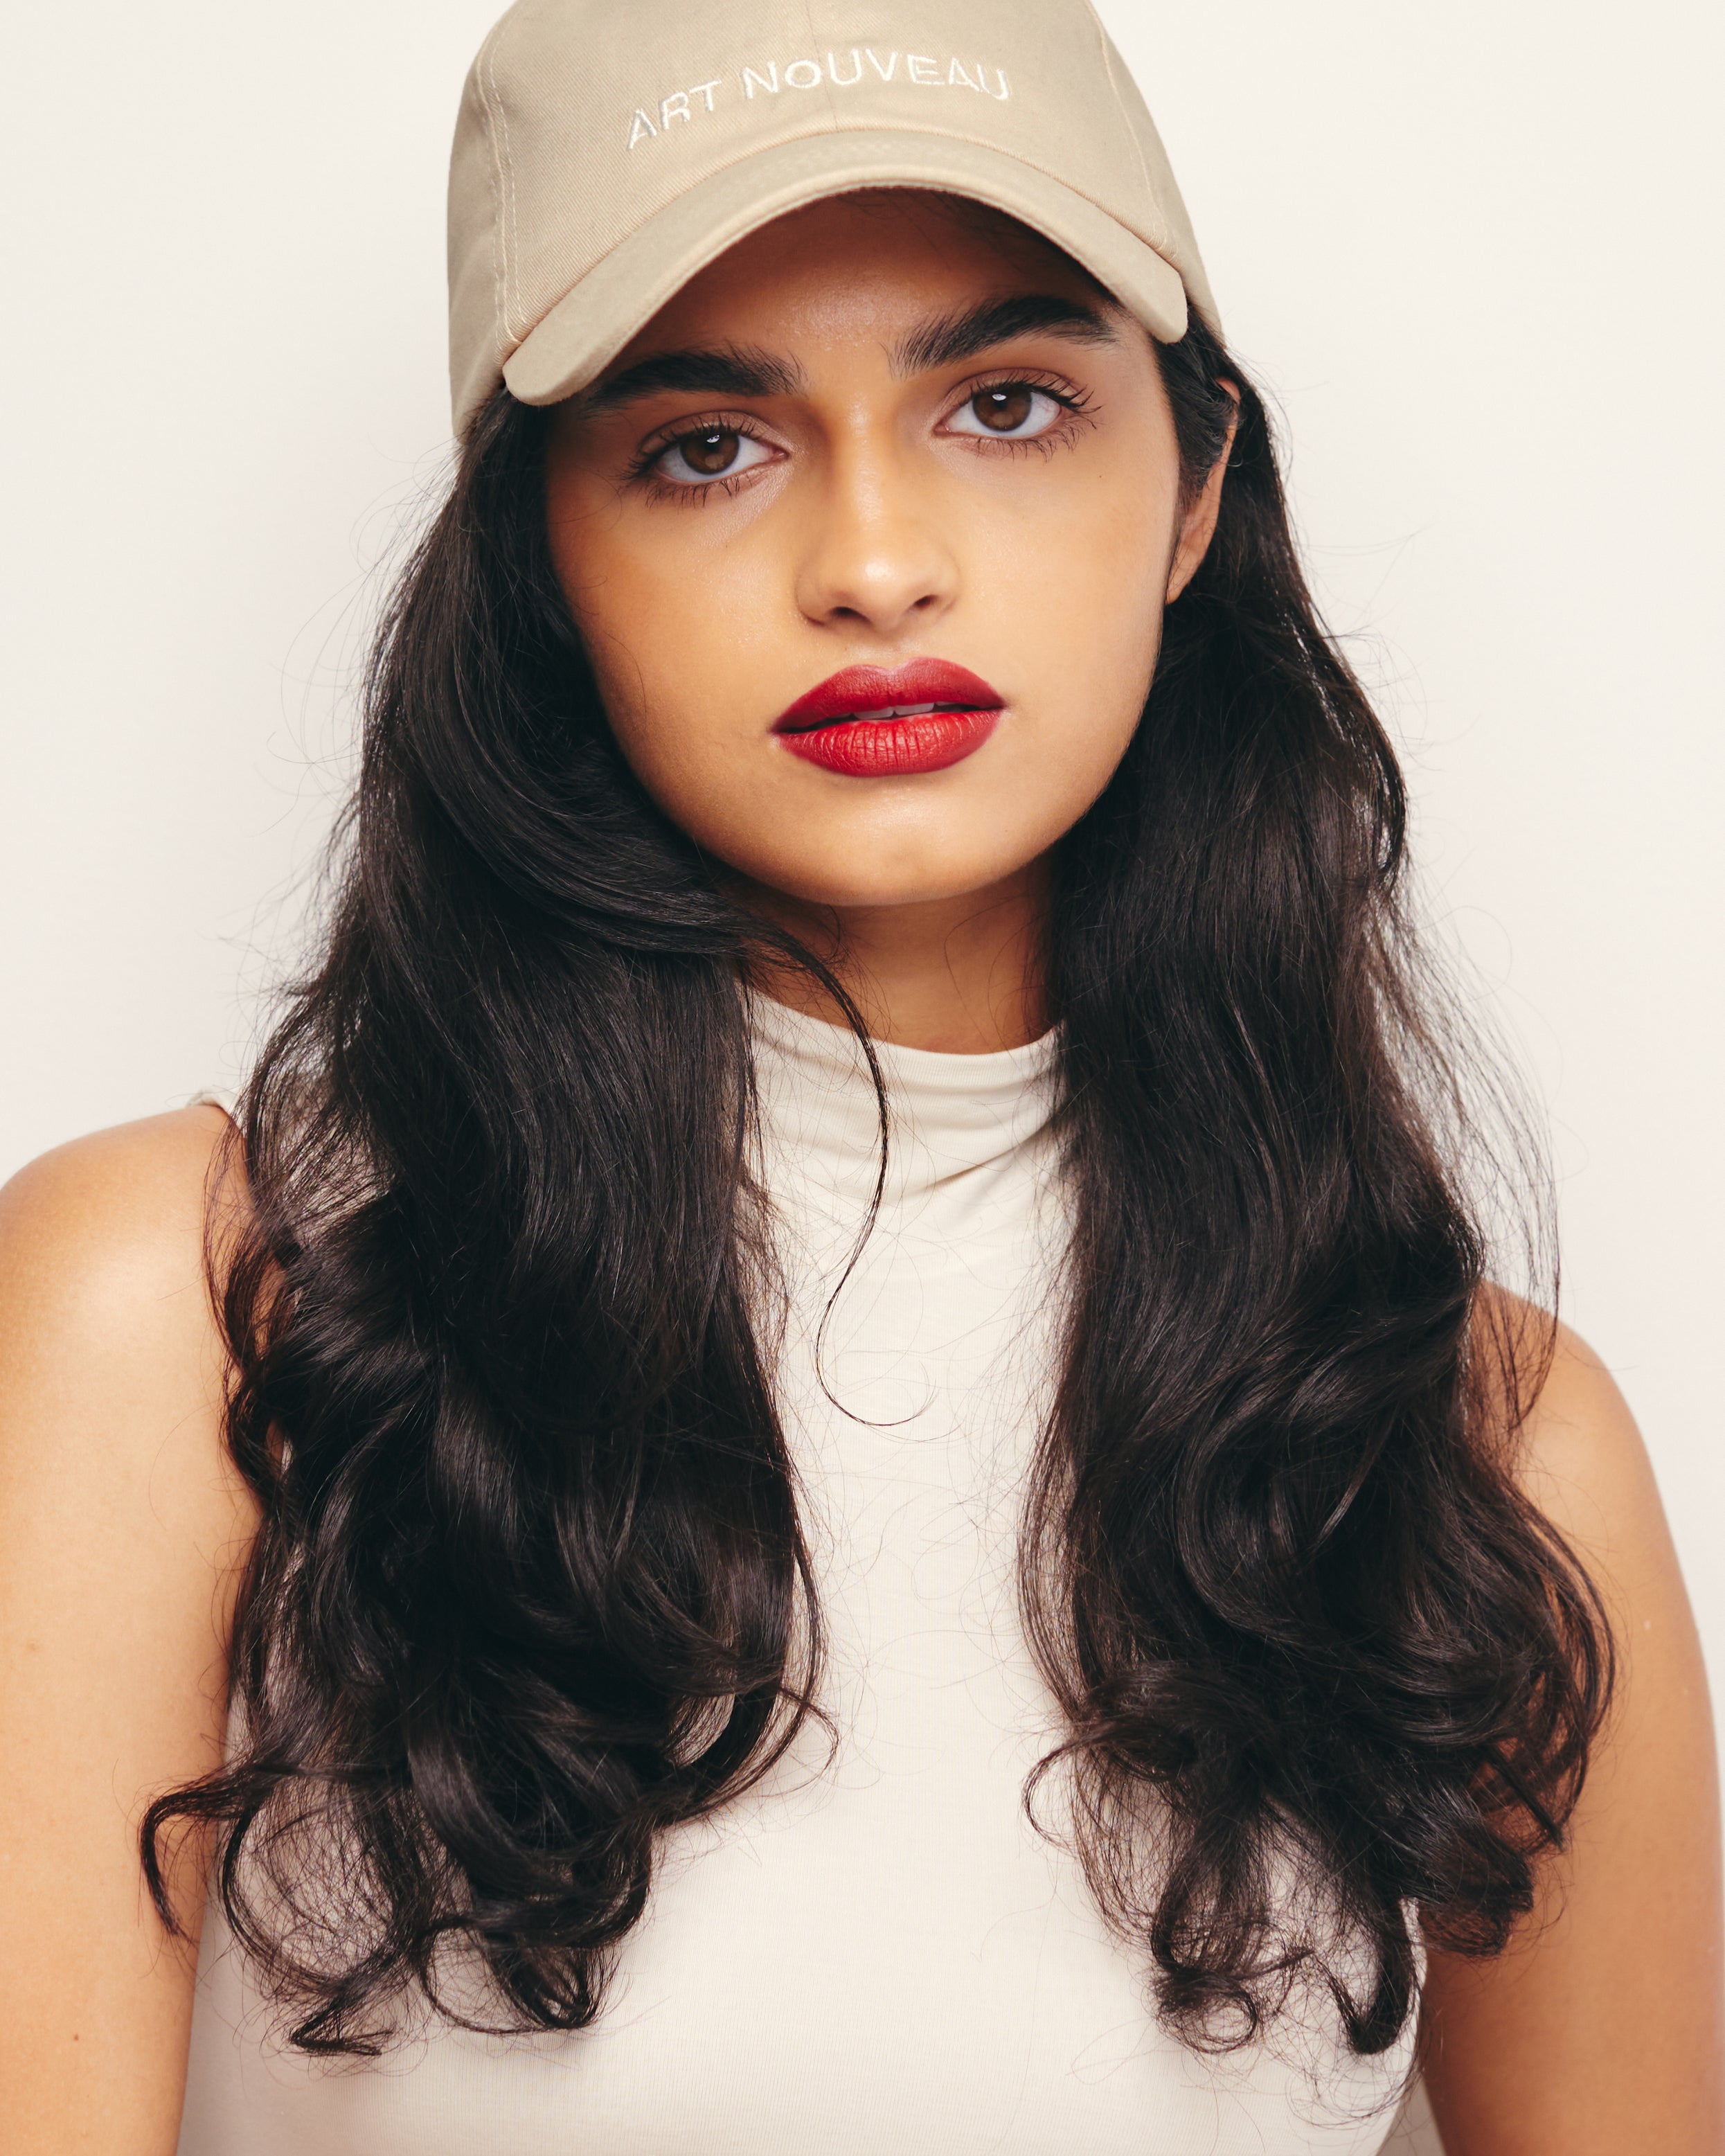 Mira Bhat wears Khaki Baseball Cap / Dad Hat with Art Nouveau Art Movement Text Embroidery on Front. 100% Cotton.